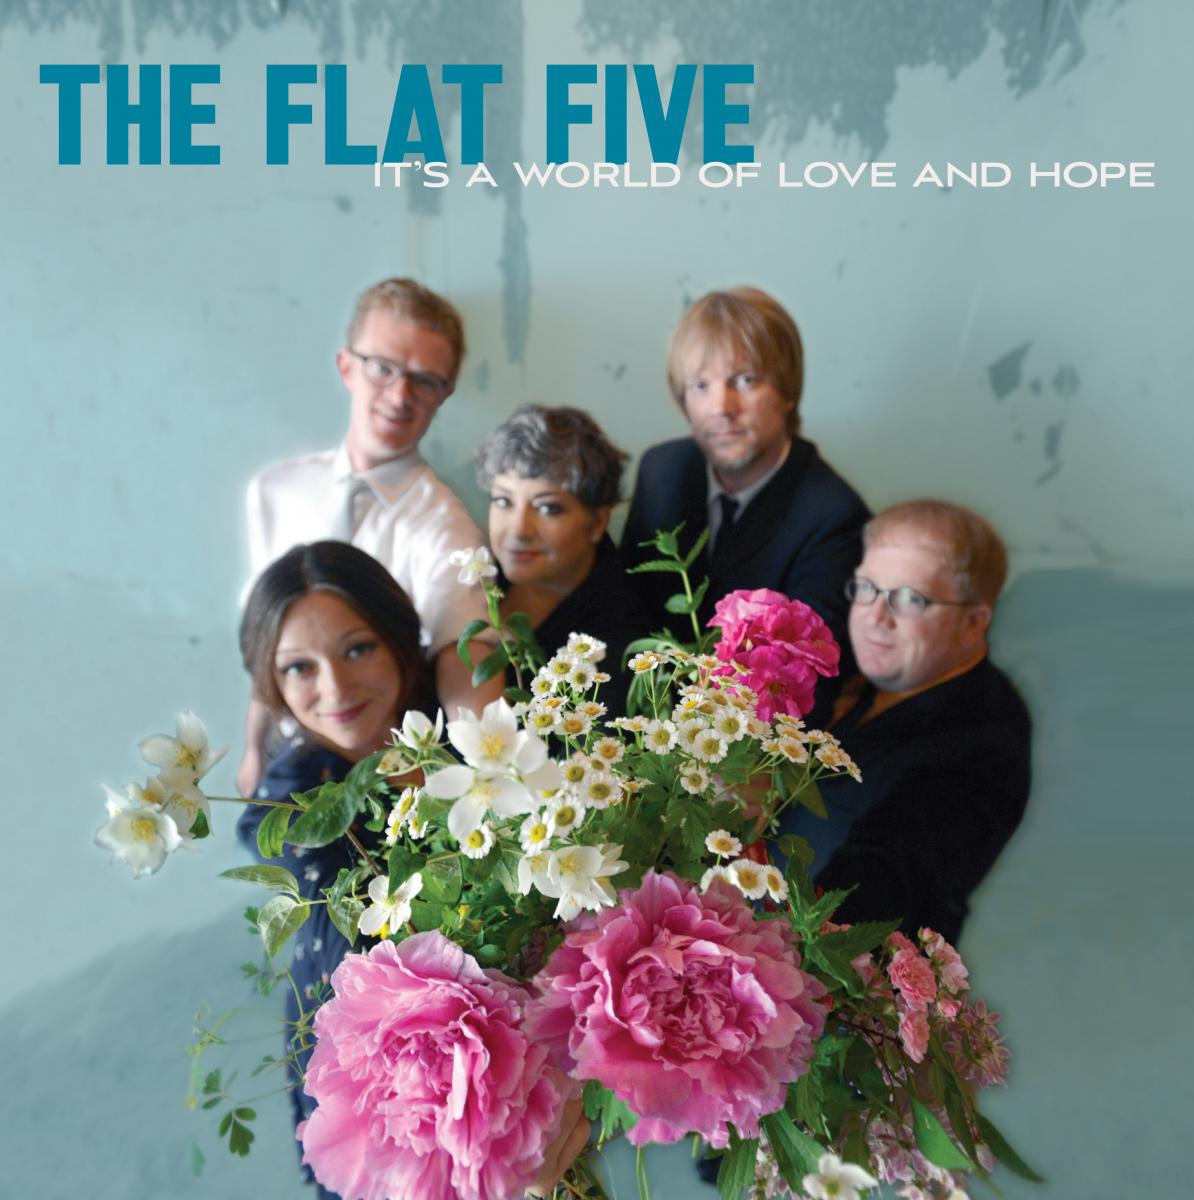 The Flat Five It's a World of Love and Hope